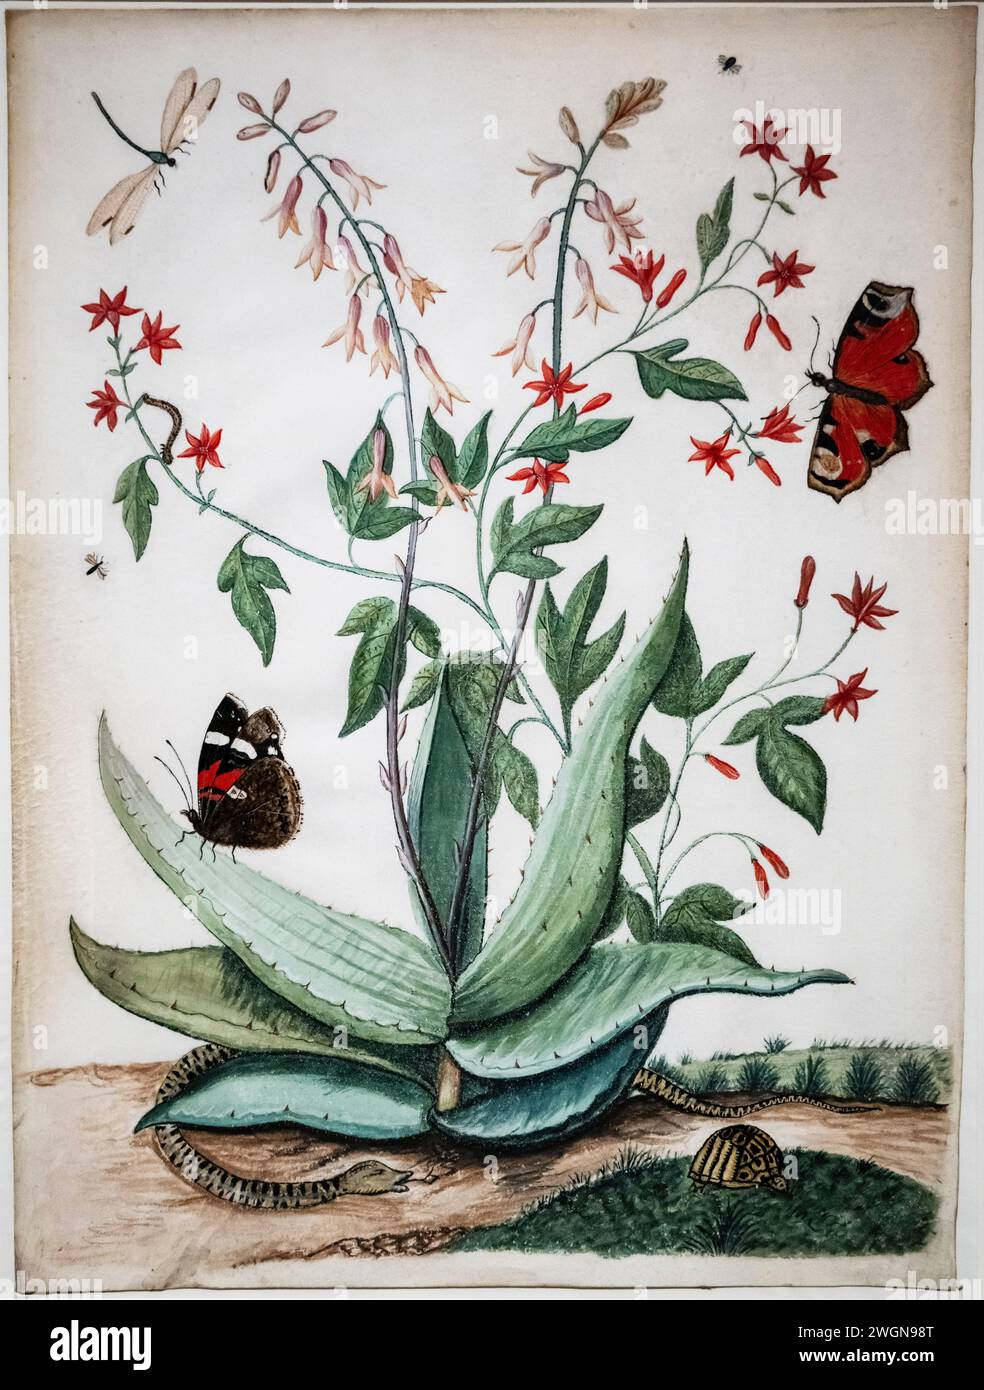 Maria Moninckx, Butterflies, Snake, Turtle and Flowering Agave, 1686-1757, watercolor and gouache on parchment, Rijksmuseum, Amsterdam Stock Photo